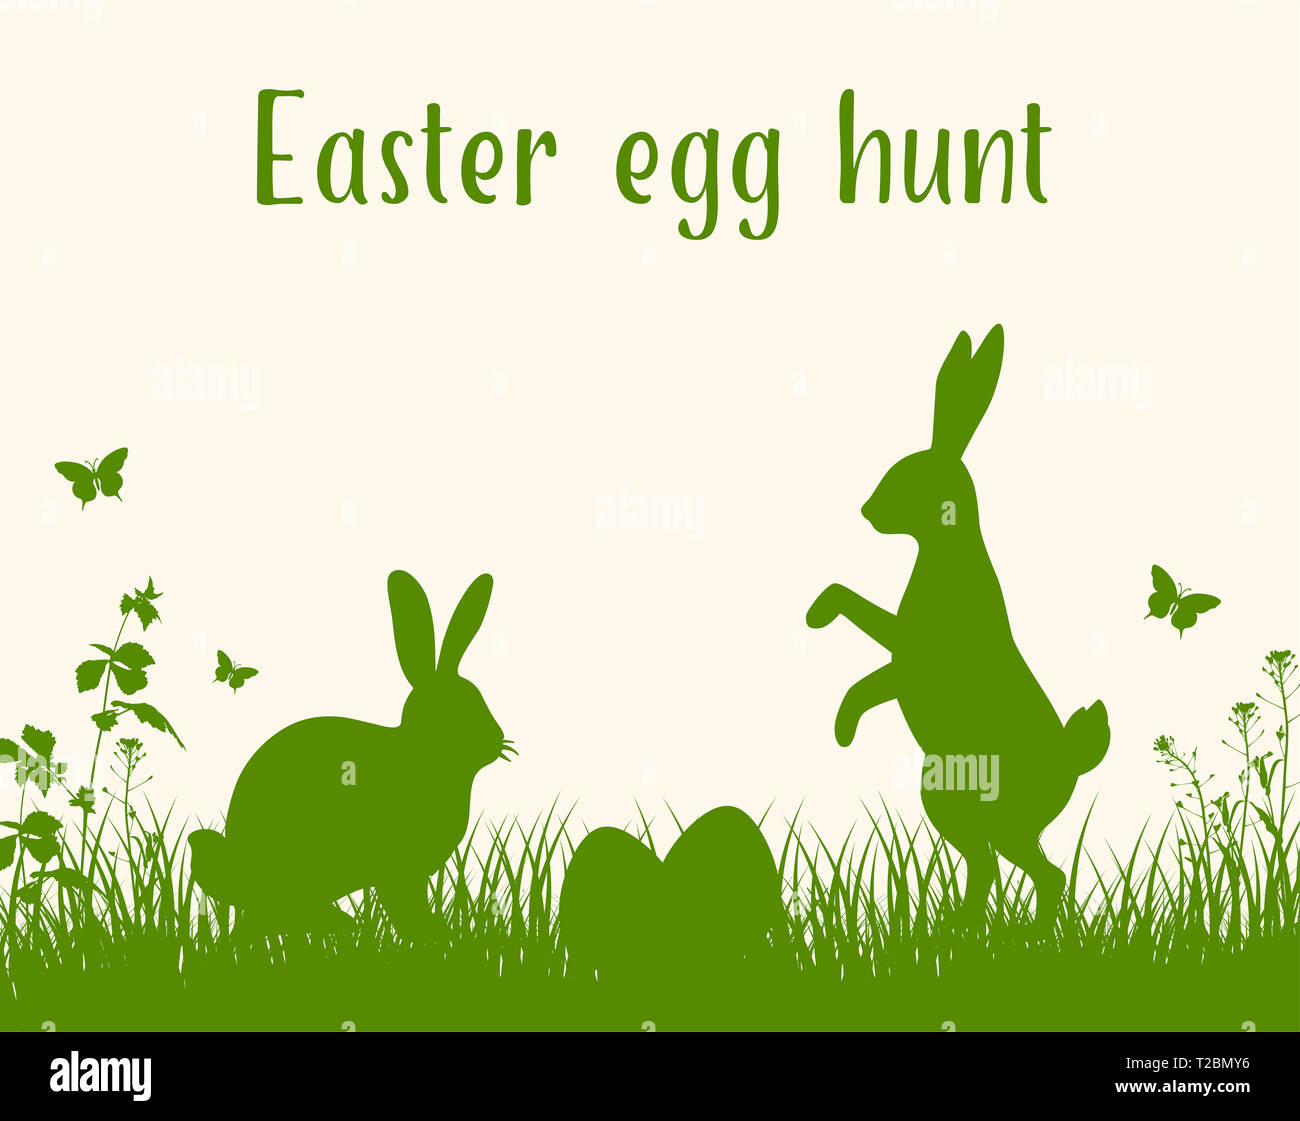 Easter green background with silhouettes of two rabbits, grass and eggs. Easter egg hunt. Stock Photo